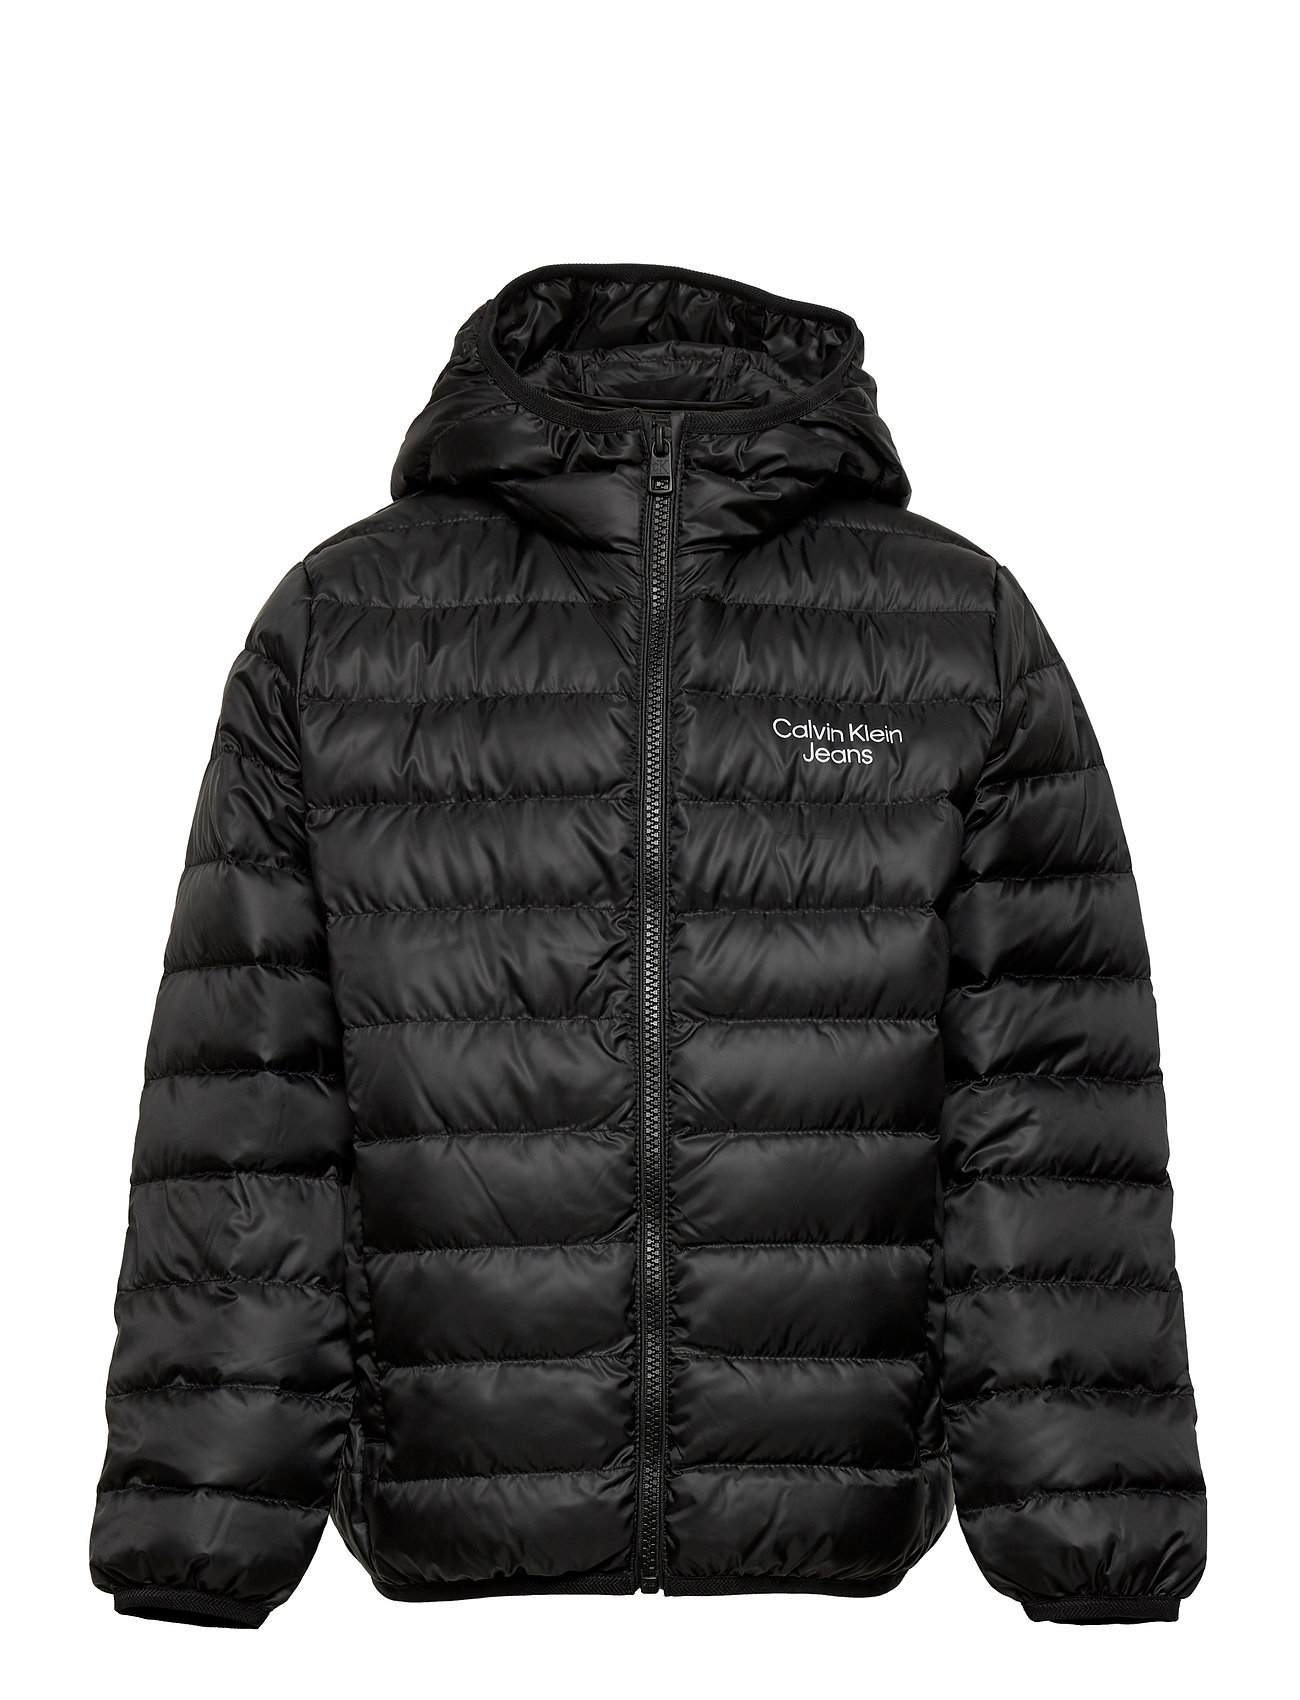 at 84.95 Lw returns Buy Padded Jacket Puffer Klein delivery Calvin easy online Calvin €. - Boozt.com. from and Logo Fast Klein & Down